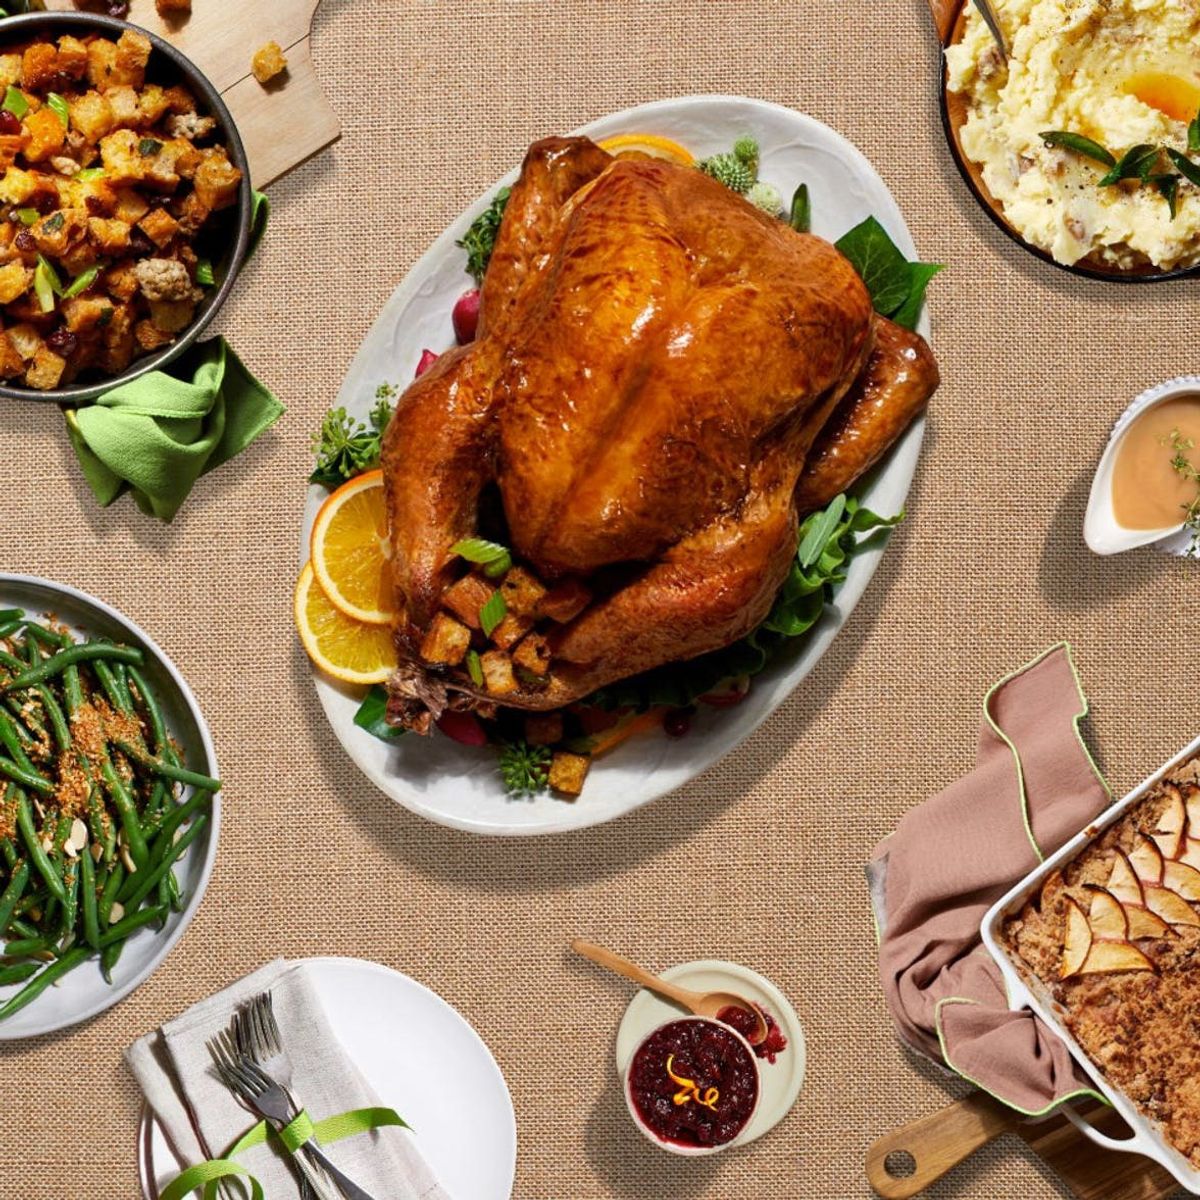 8 Thanksgiving Meal Kits That Do All the Planning for You